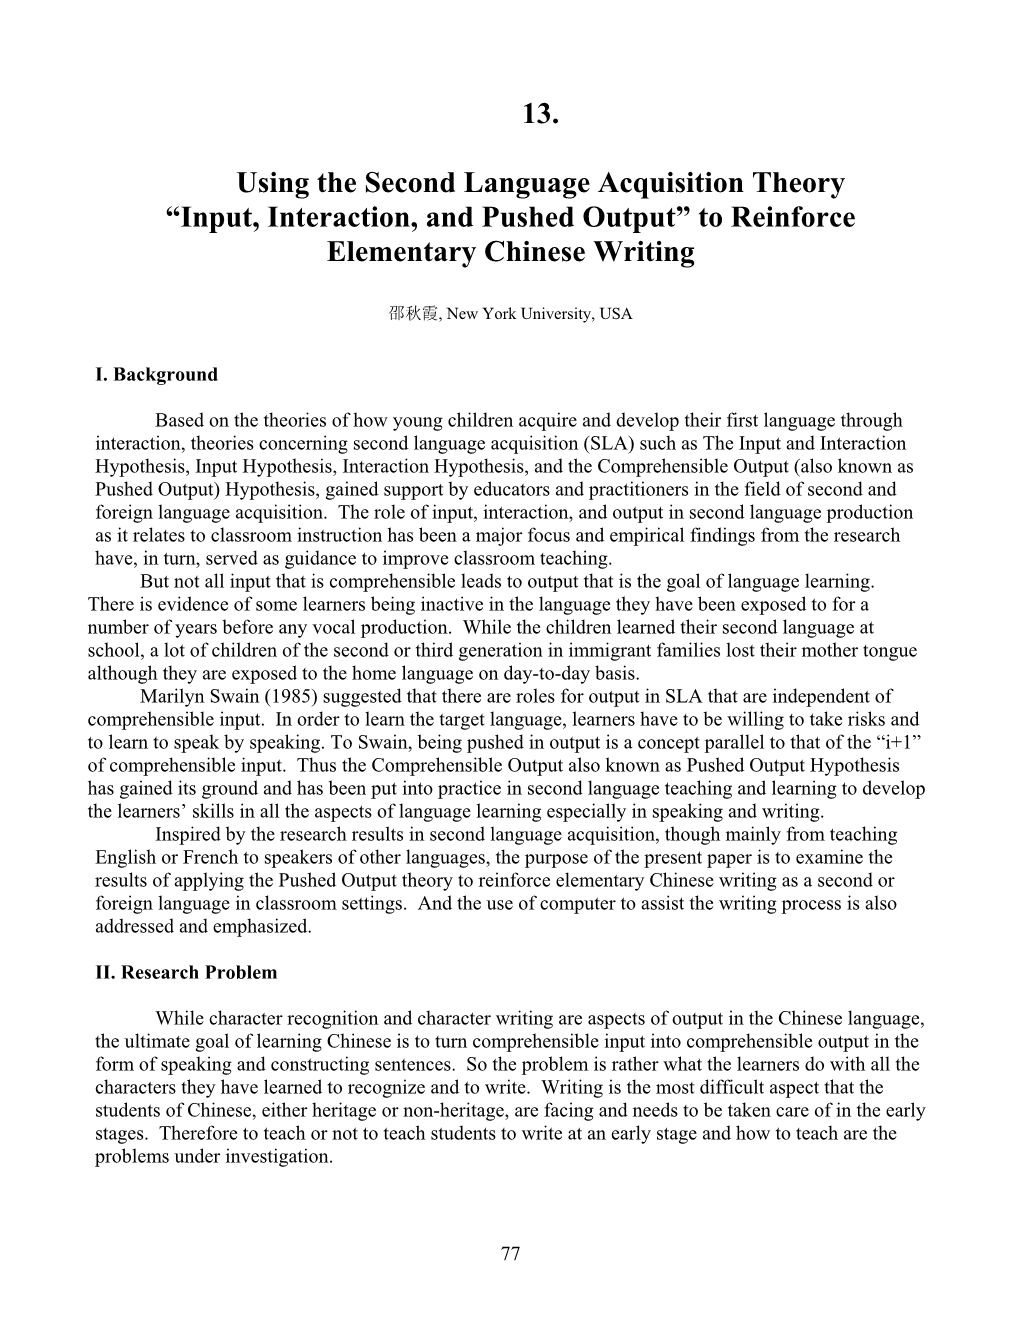 13. Using the Second Language Acquisition Theory “Input